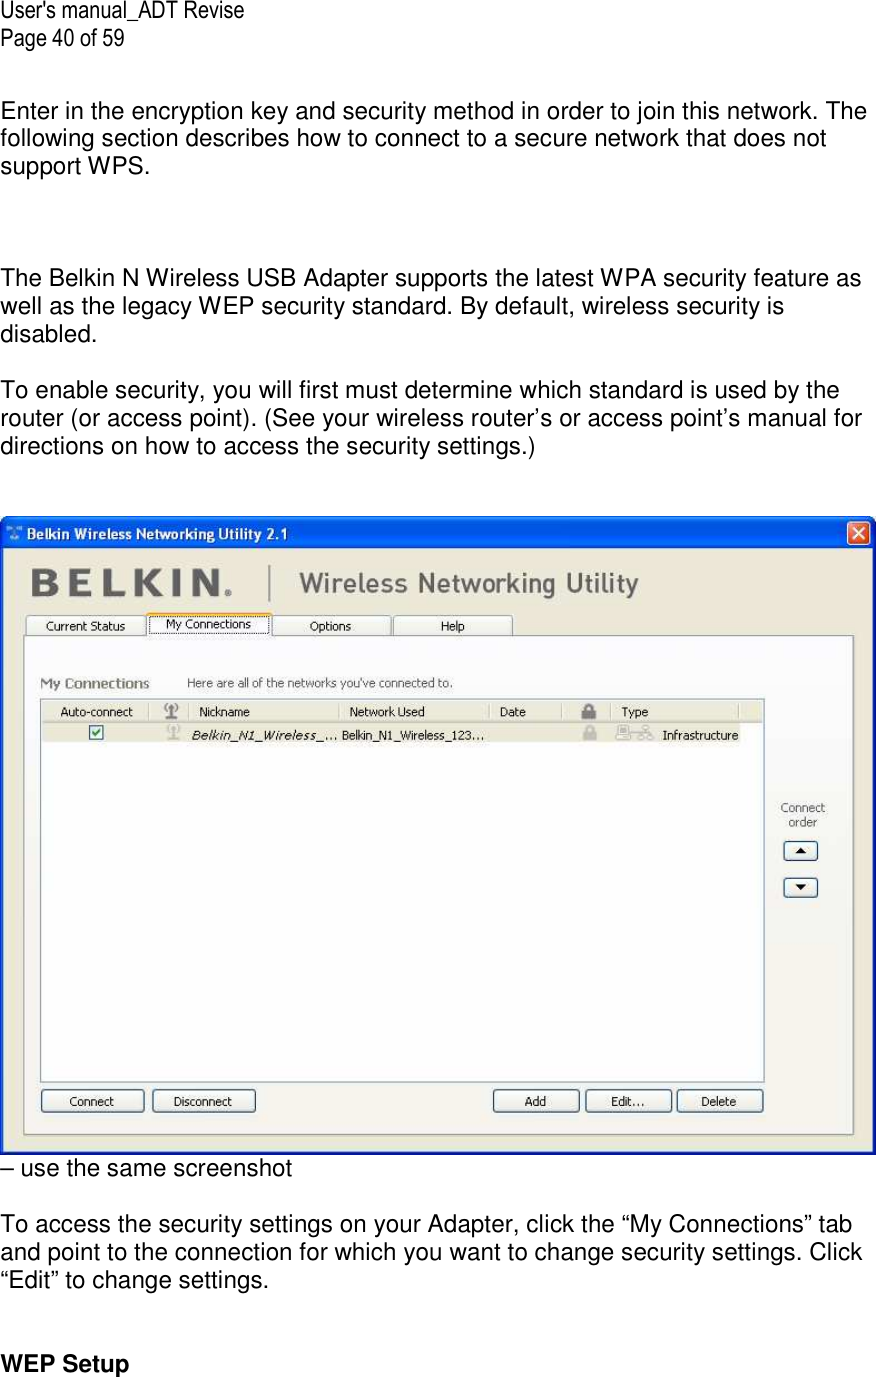 User&apos;s manual_ADT Revise Page 40 of 59  Enter in the encryption key and security method in order to join this network. The following section describes how to connect to a secure network that does not support WPS.    The Belkin N Wireless USB Adapter supports the latest WPA security feature as well as the legacy WEP security standard. By default, wireless security is disabled.  To enable security, you will first must determine which standard is used by the router (or access point). (See your wireless router’s or access point’s manual for directions on how to access the security settings.)   – use the same screenshot  To access the security settings on your Adapter, click the “My Connections” tab and point to the connection for which you want to change security settings. Click “Edit” to change settings.    WEP Setup 